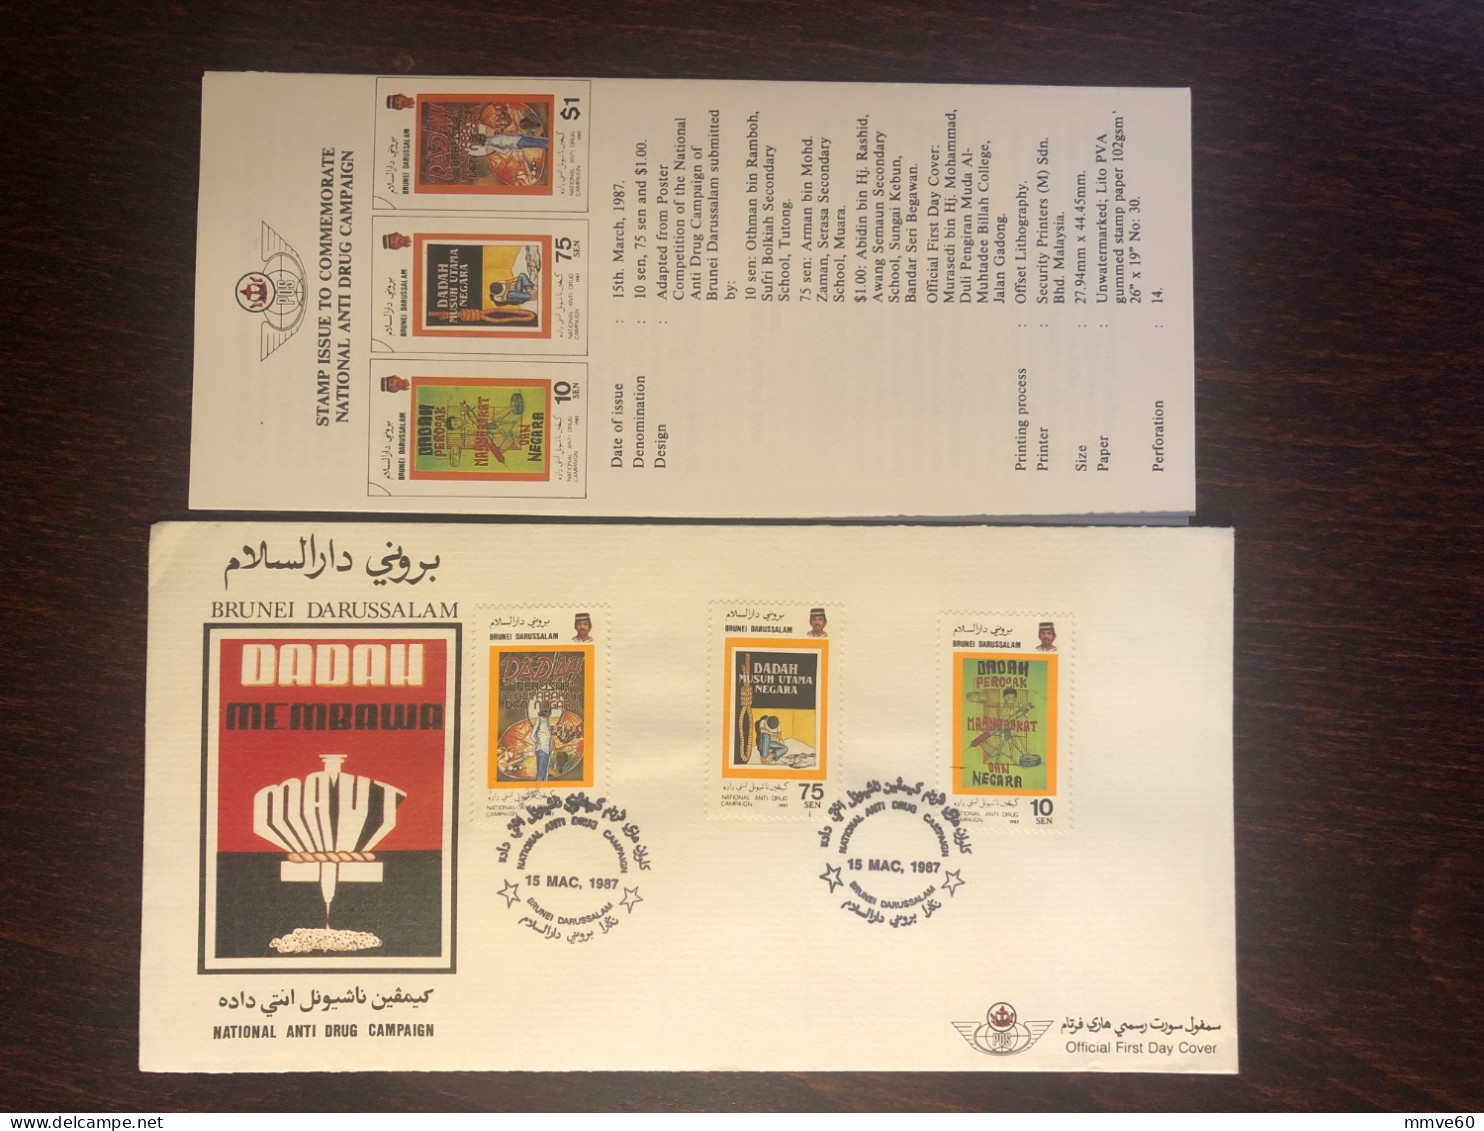 BRUNEI FDC COVER 1987 YEAR DRUGS NARCOTICS HEALTH MEDICINE STAMPS - Brunei (1984-...)